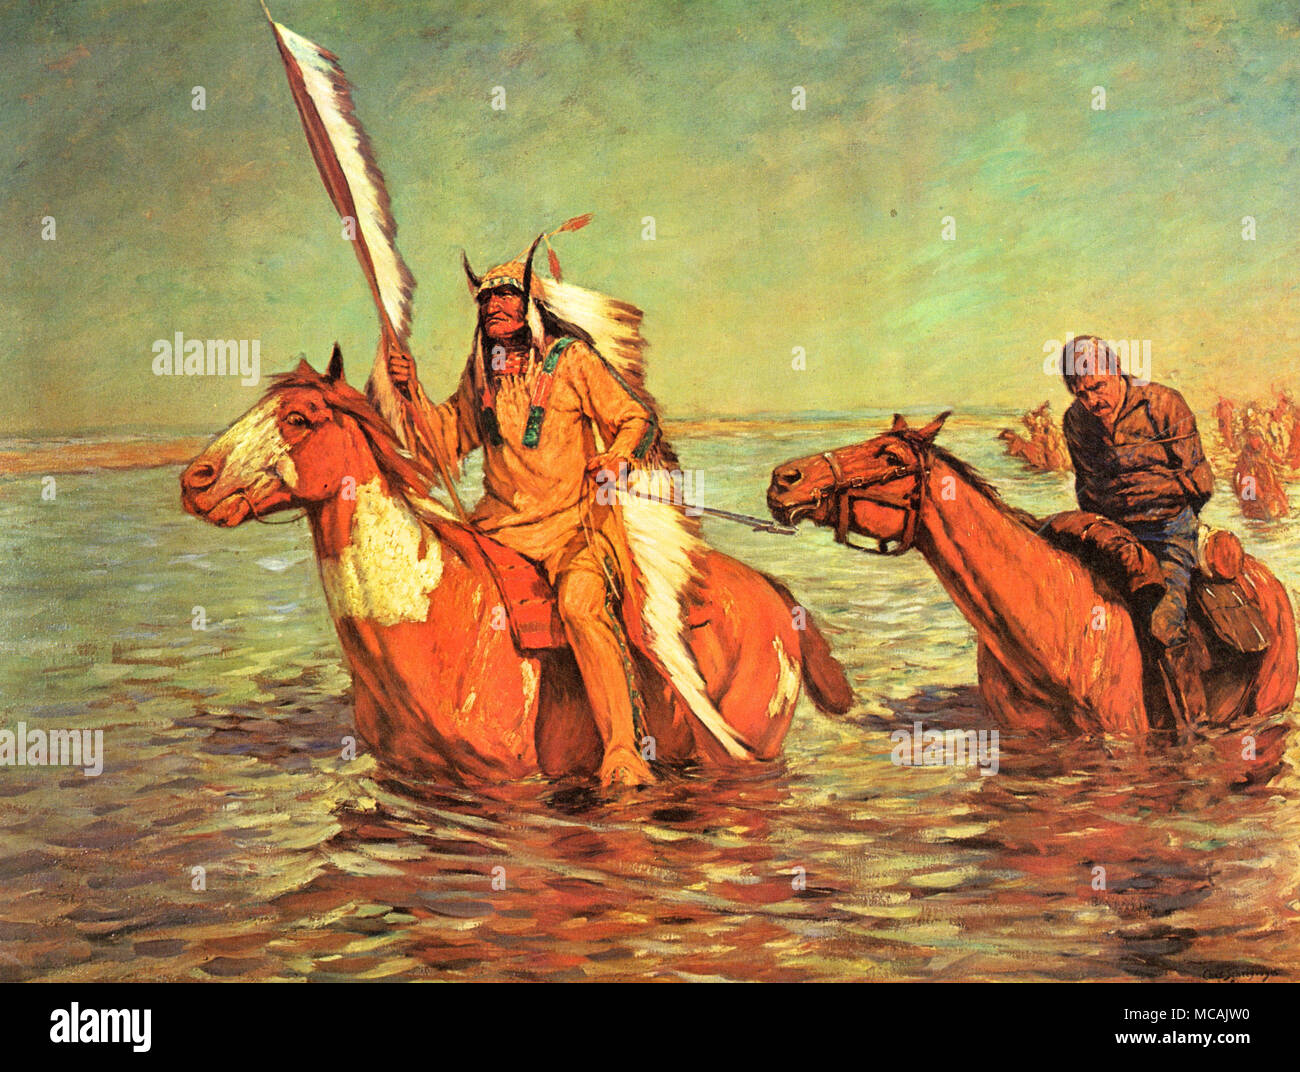 Bluecoat Prisoner on is horse and tied being led by an Indian and followed by a column of braves crossing a stream.  Charles Schreyvogel (January 4, 1861-January 27, 1912) was a painter of Western subject matter in the days of the disappearing frontier. Schreyvogel was especially interested in military life. Stock Photo